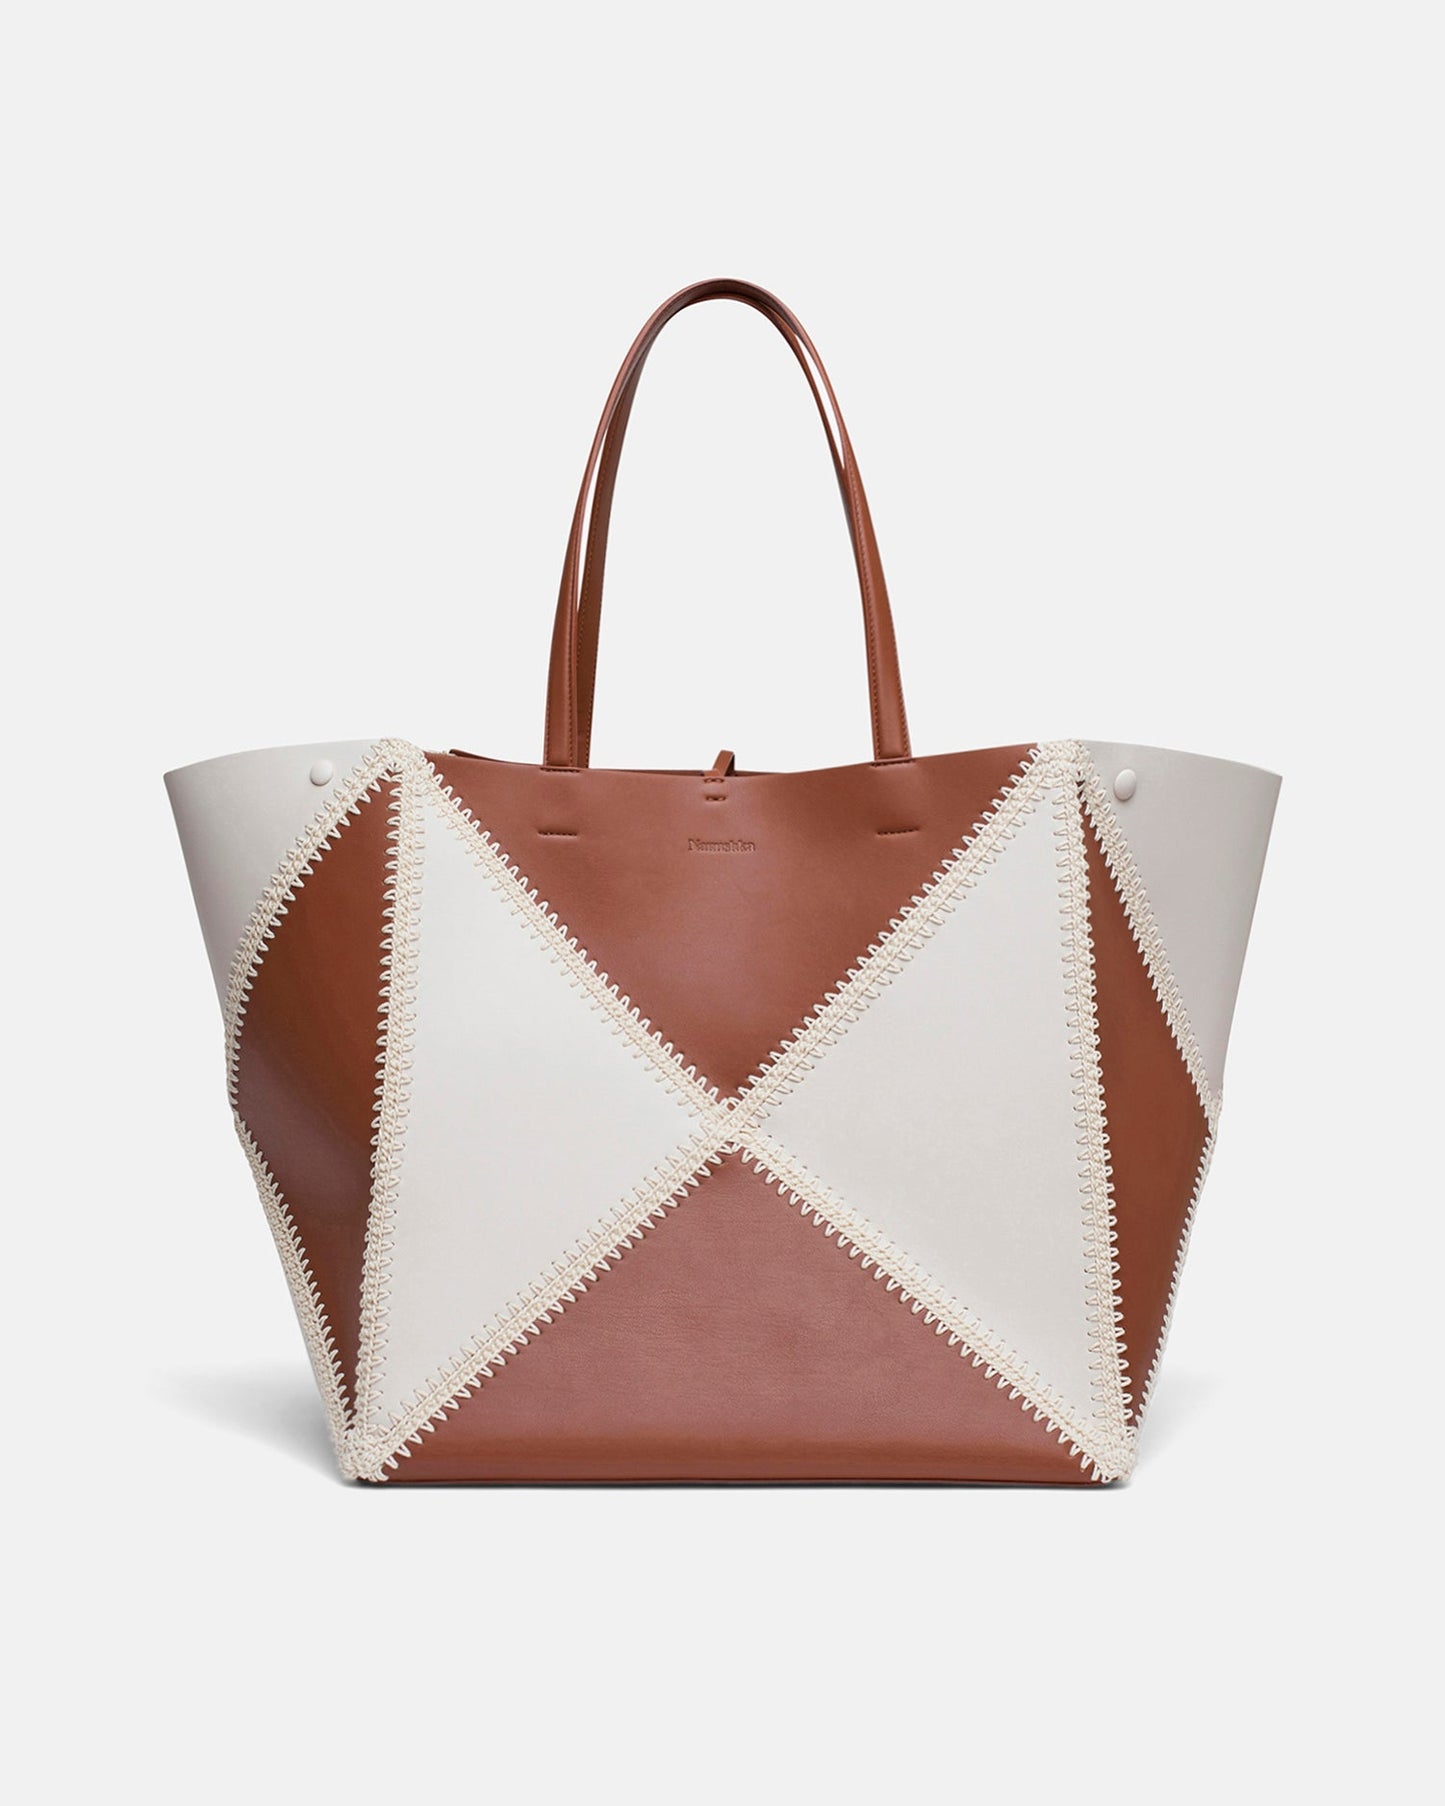 The Origami Tote Large - Alt-Nappa Crochet Large Tote - Tan Leather